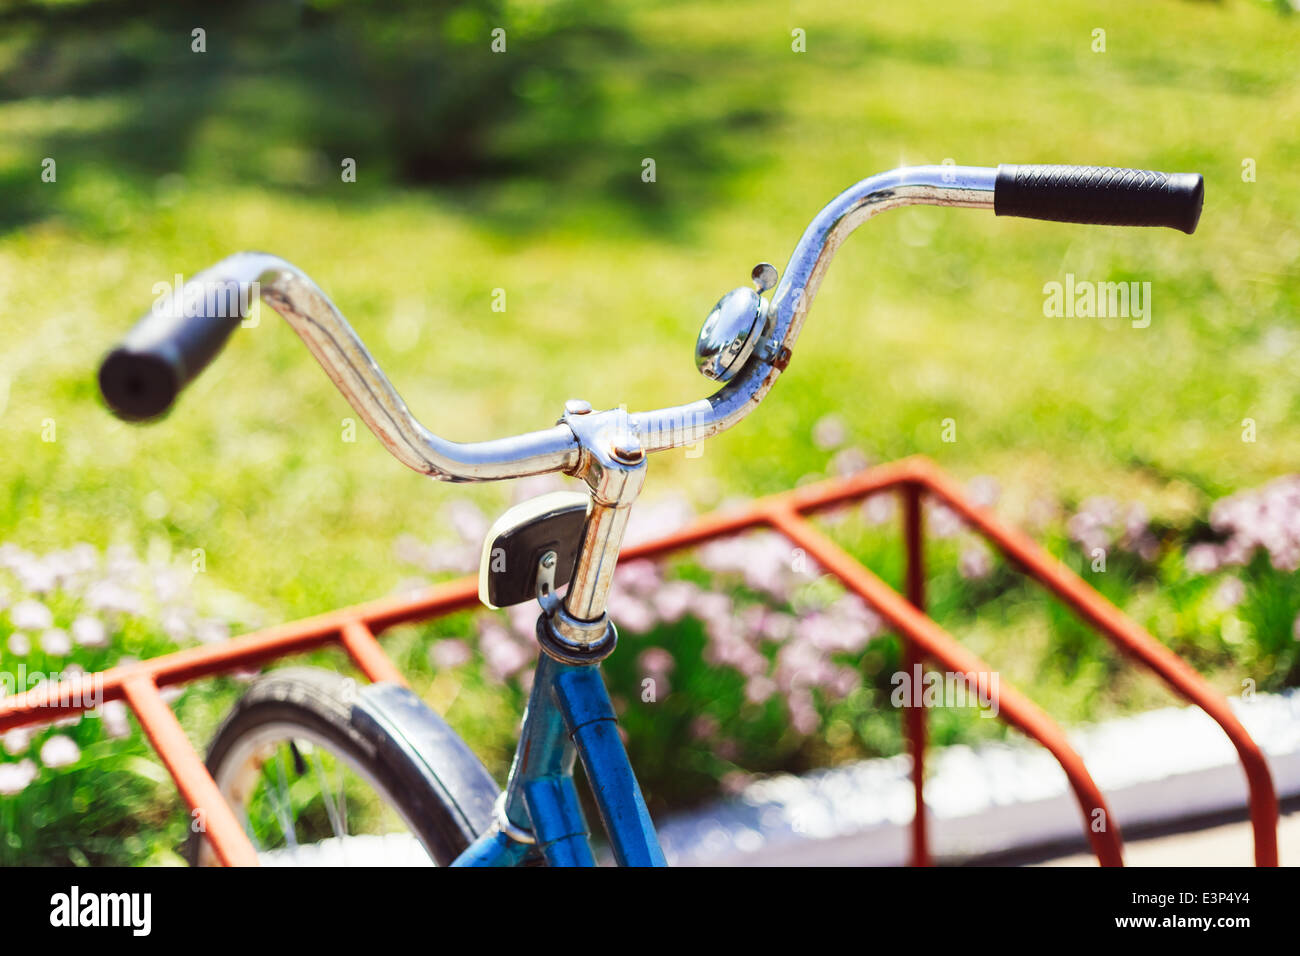 Vintage bicycle handlebar detail close up with parking bokeh background in flower bed in sunny day Stock Photo